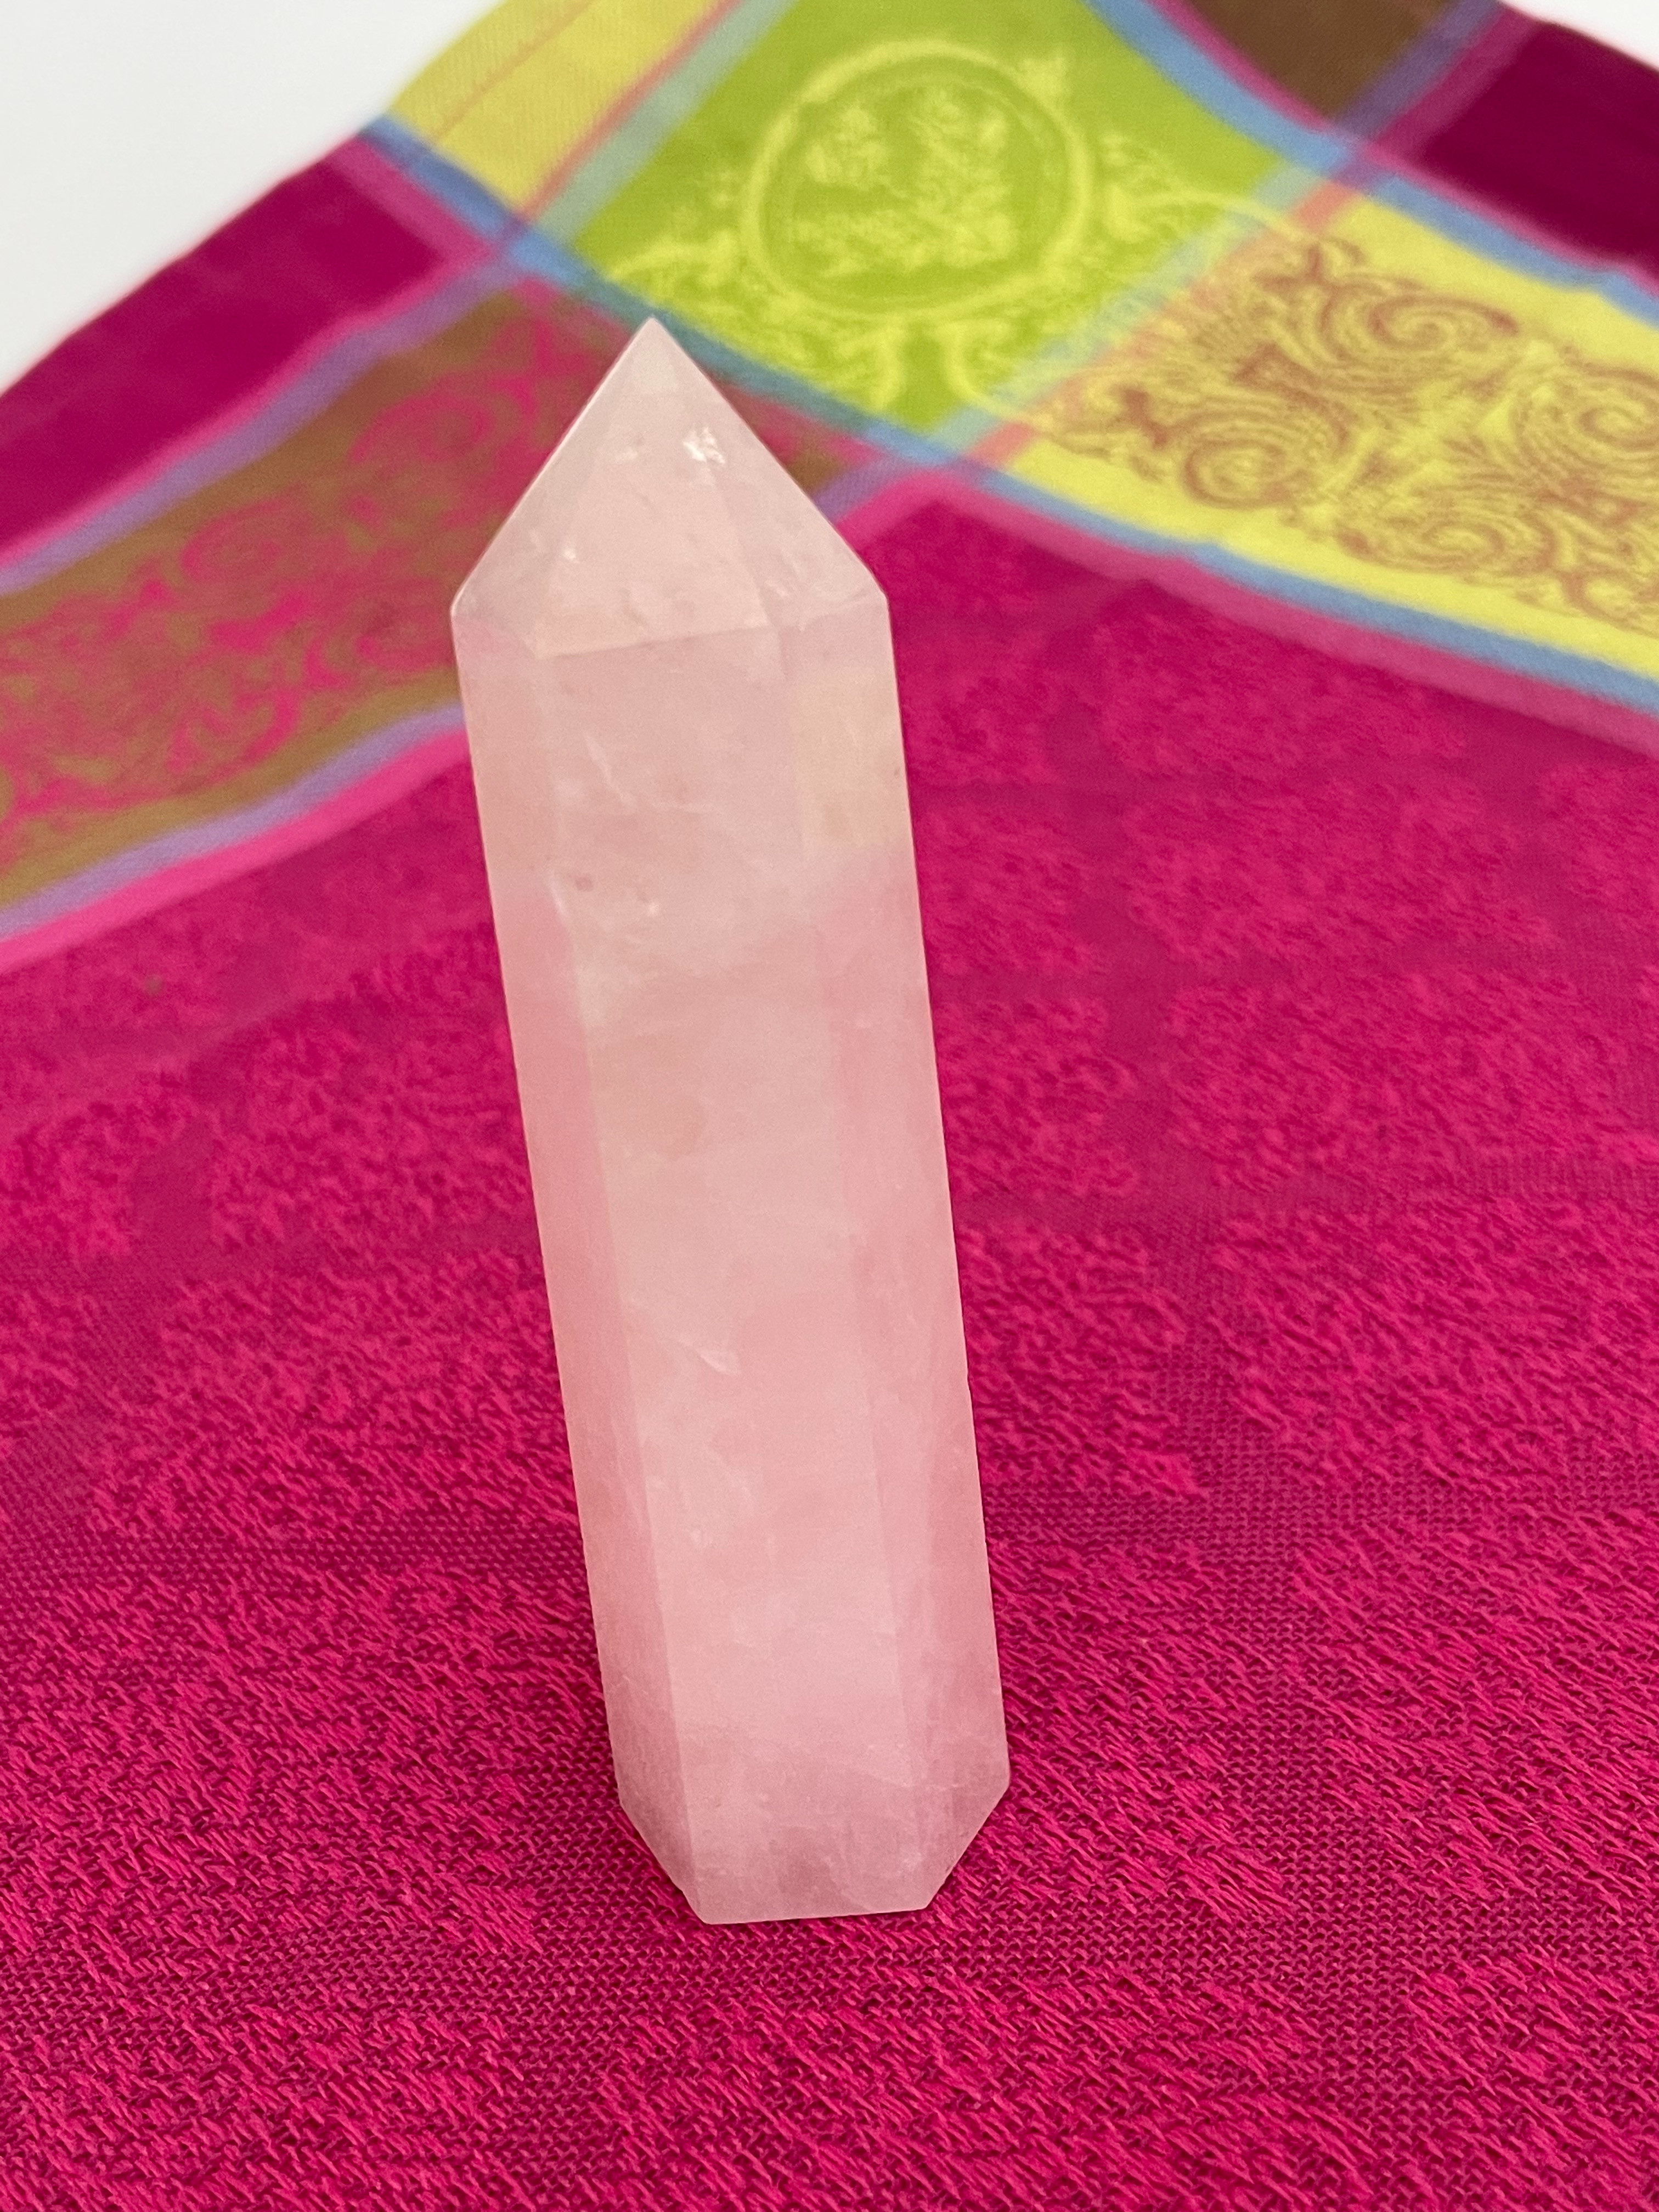 Alternate view. Rose Quartz tower of love 💗. Beautiful rose quartz tower for your altar, for healing or as décor for any room in your home or office. Rose quartz is the ultimate love stone, for love of all types - to attract love and for self-love. It is soothing, enhances compassion, is the best emotional healer, dispels negative energy, opens your heart and so much more. Place this rose quartz tower in your space to radiate a loving vibe all day long. The tower is approximately 3½" long. Cost is $14.